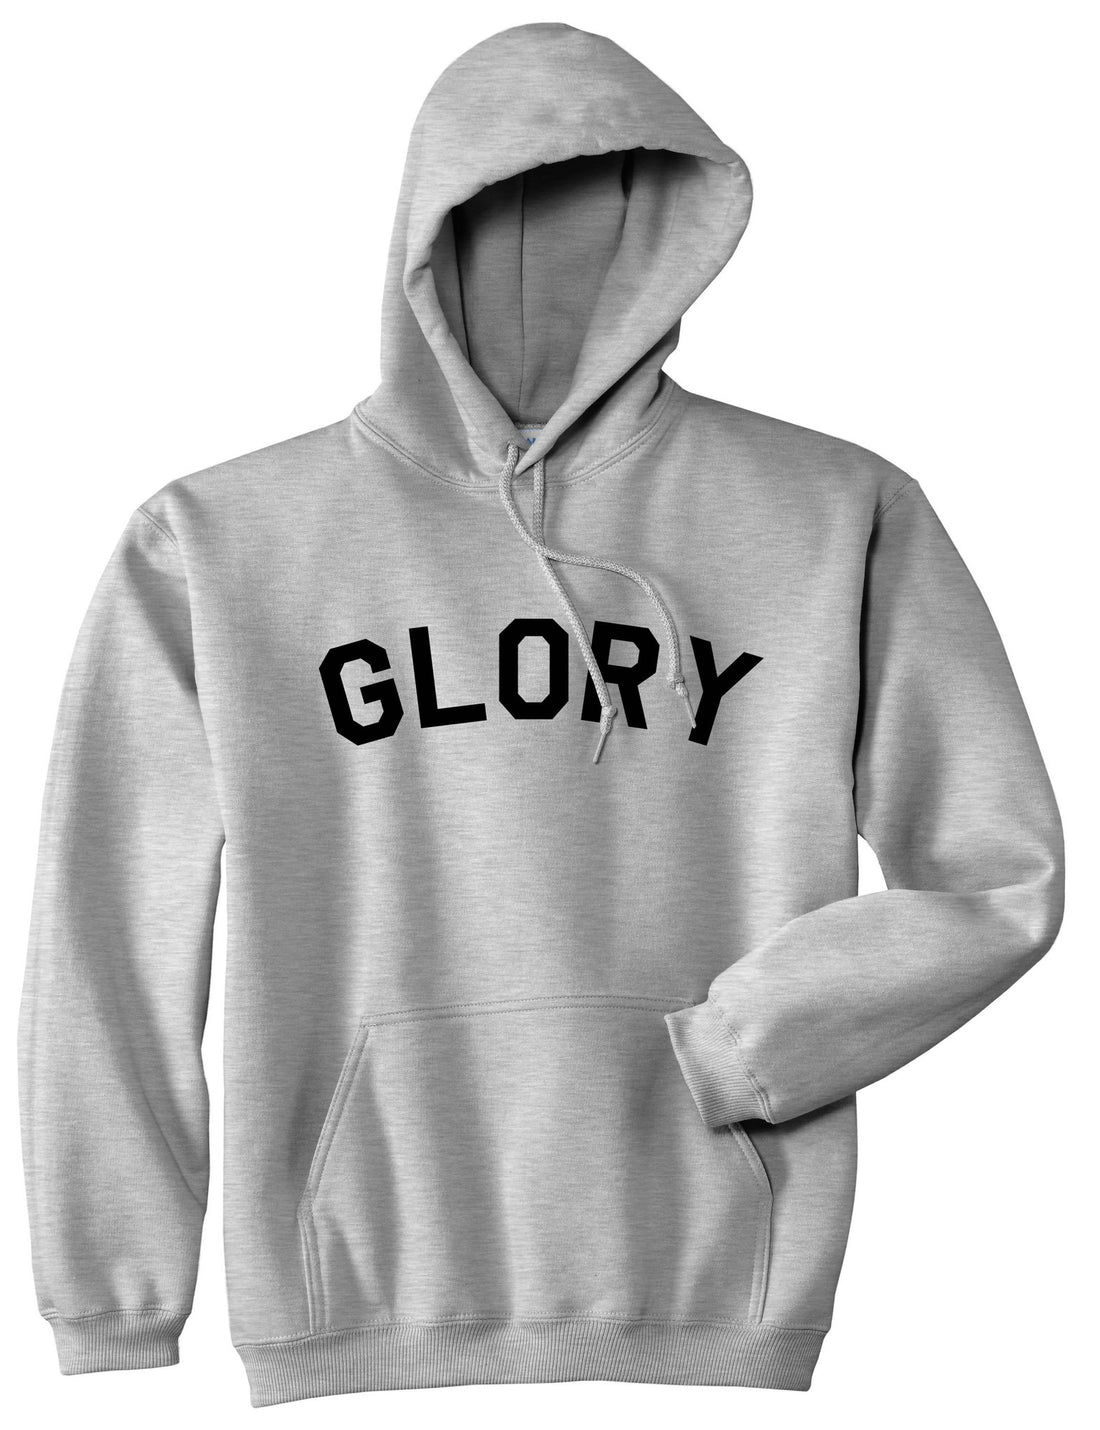 GLORY New York Champs Jersey Pullover Hoodie Hoody in Grey